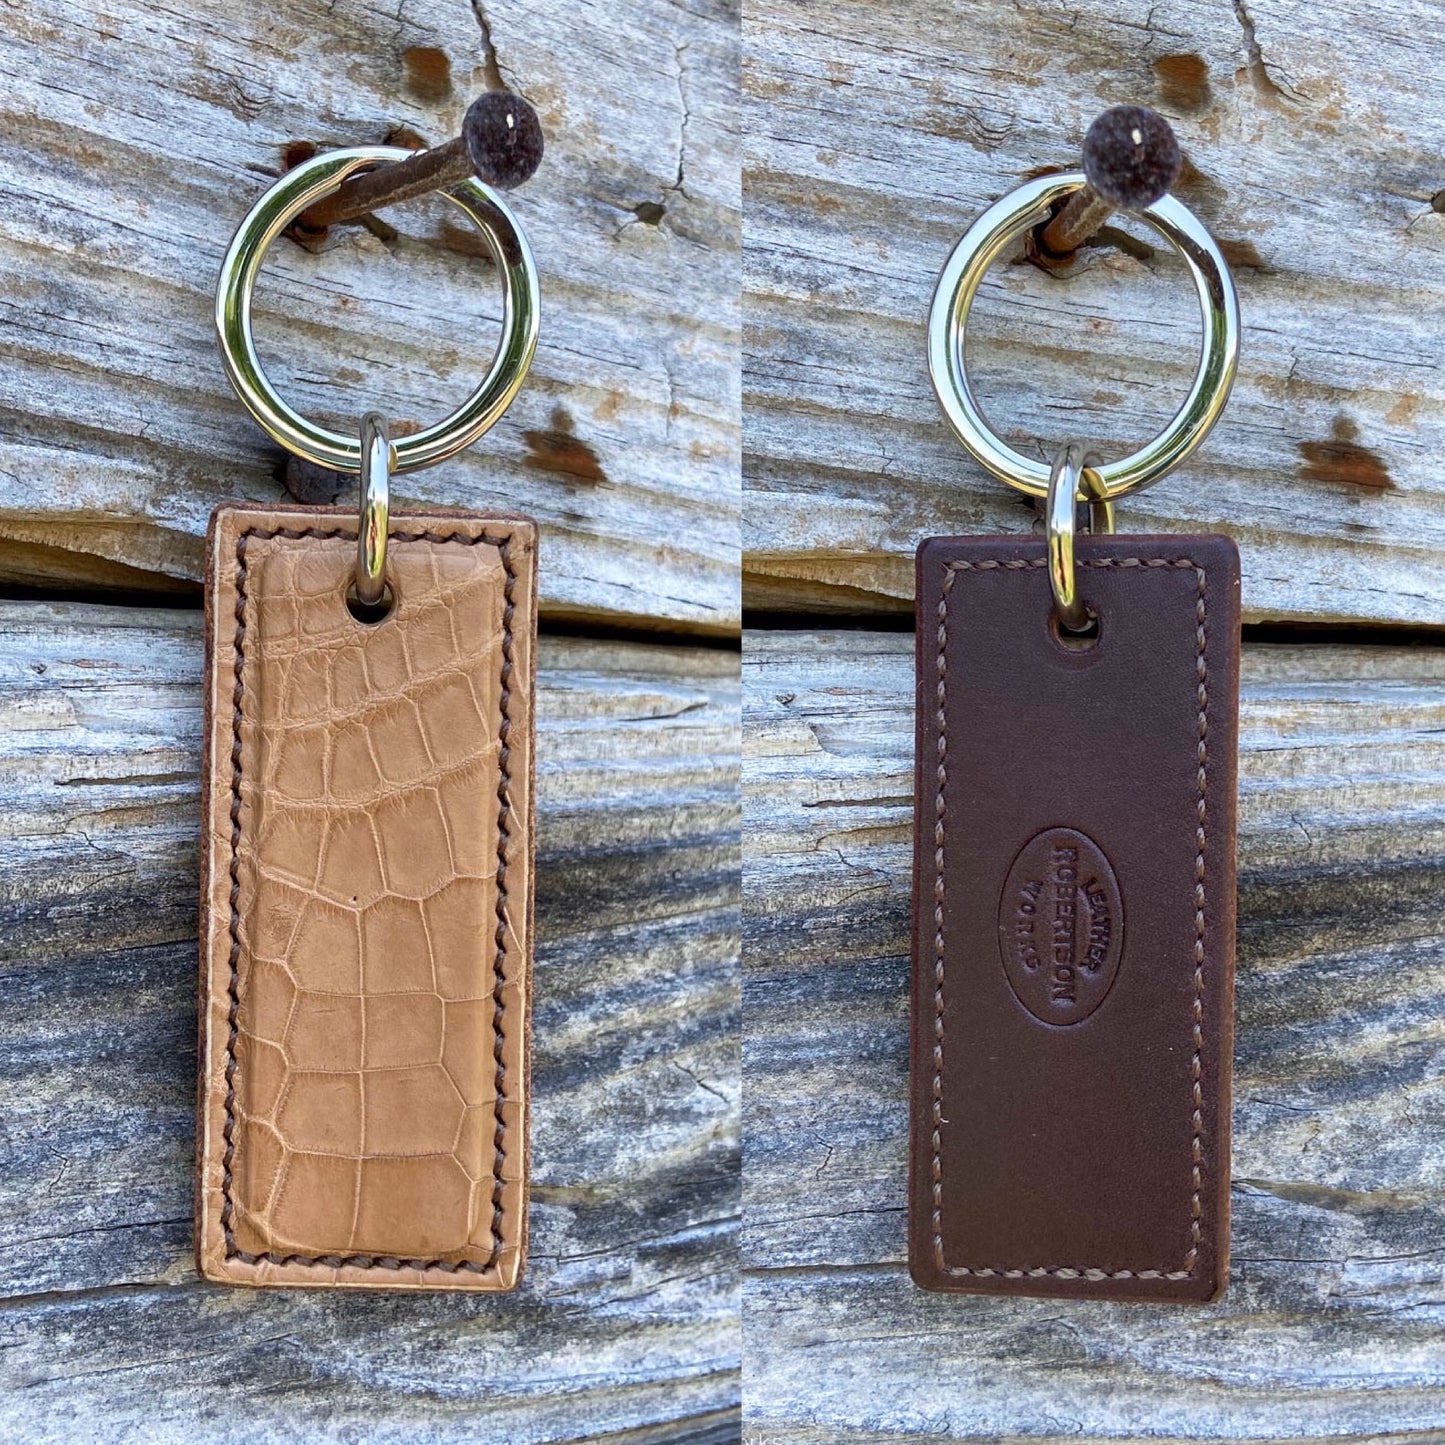 Exotic Leather Key Chain/ Fob